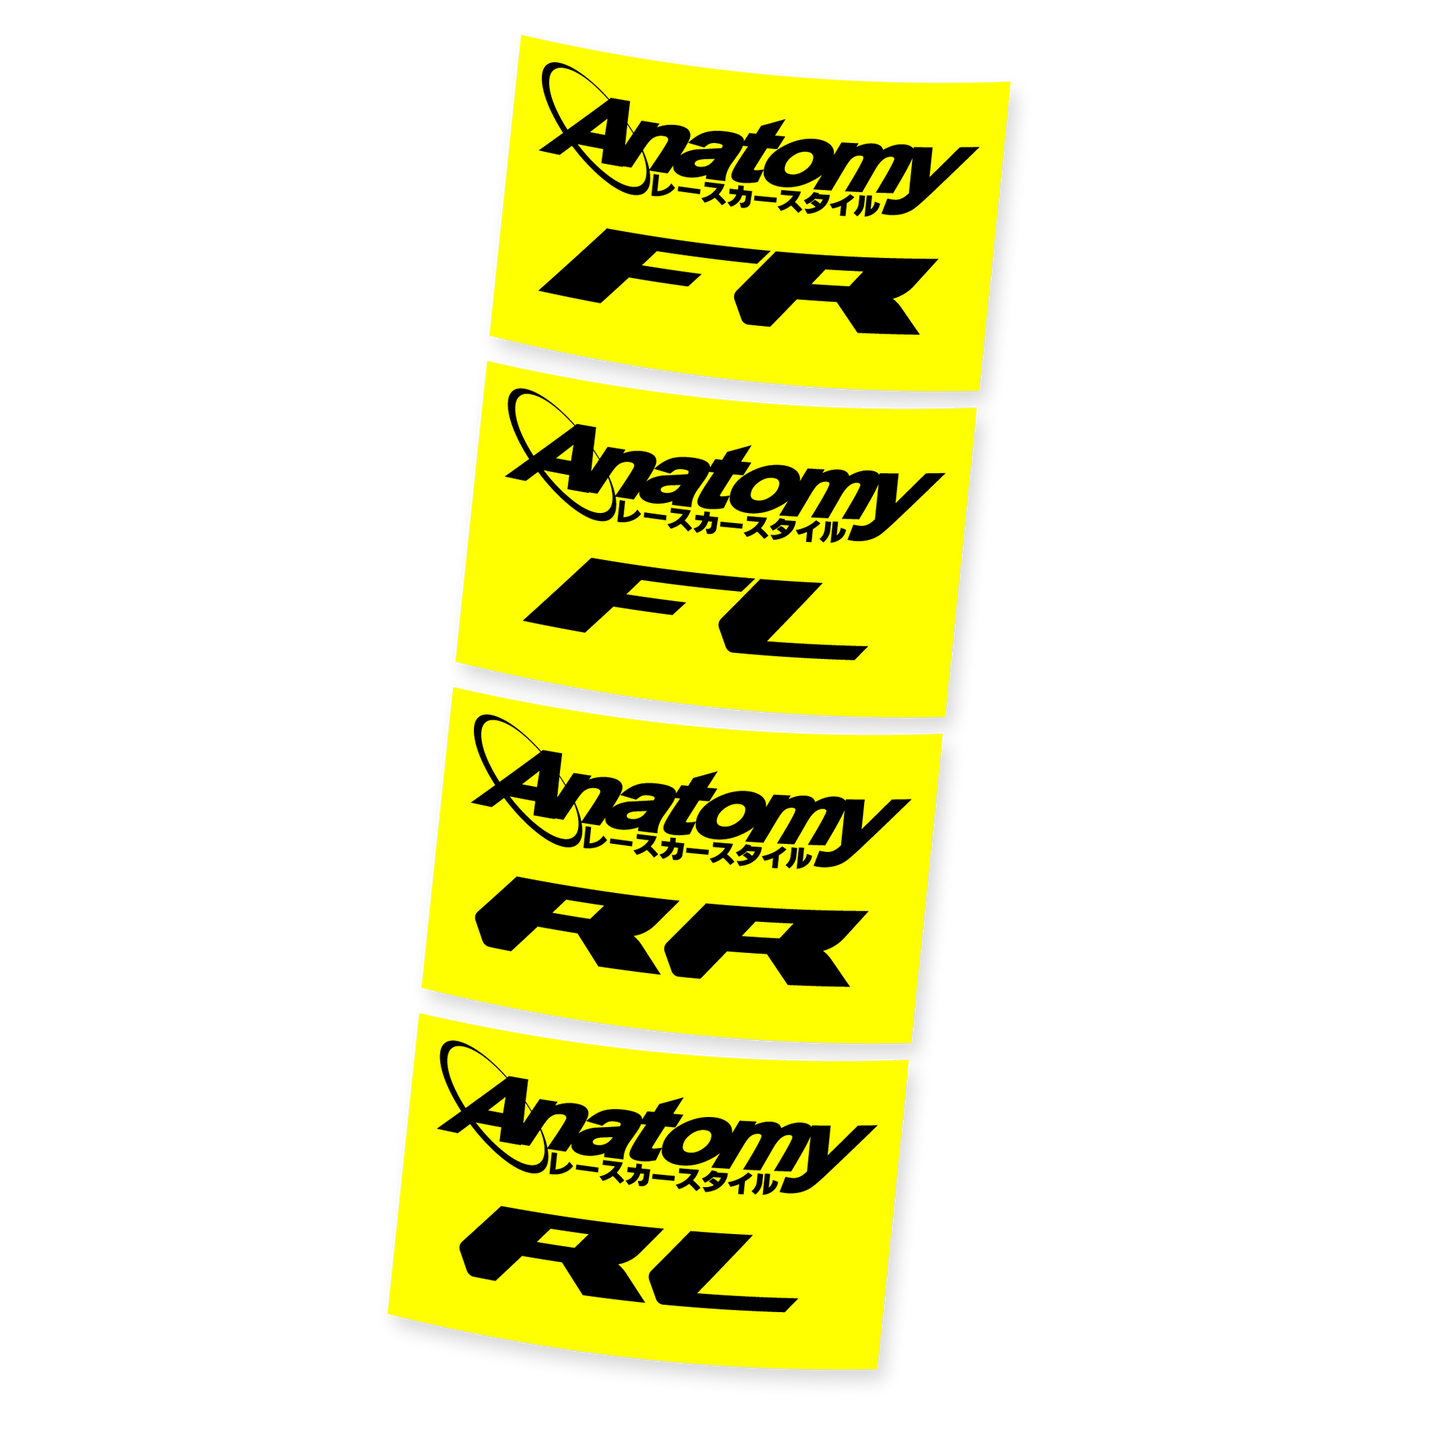 4 WHEEL DECALS FOR TIRE/WHEEL LOCATION  FR, FL, RR, RL  USED FOR TIRE USAGE AND WHEEL ROTATION